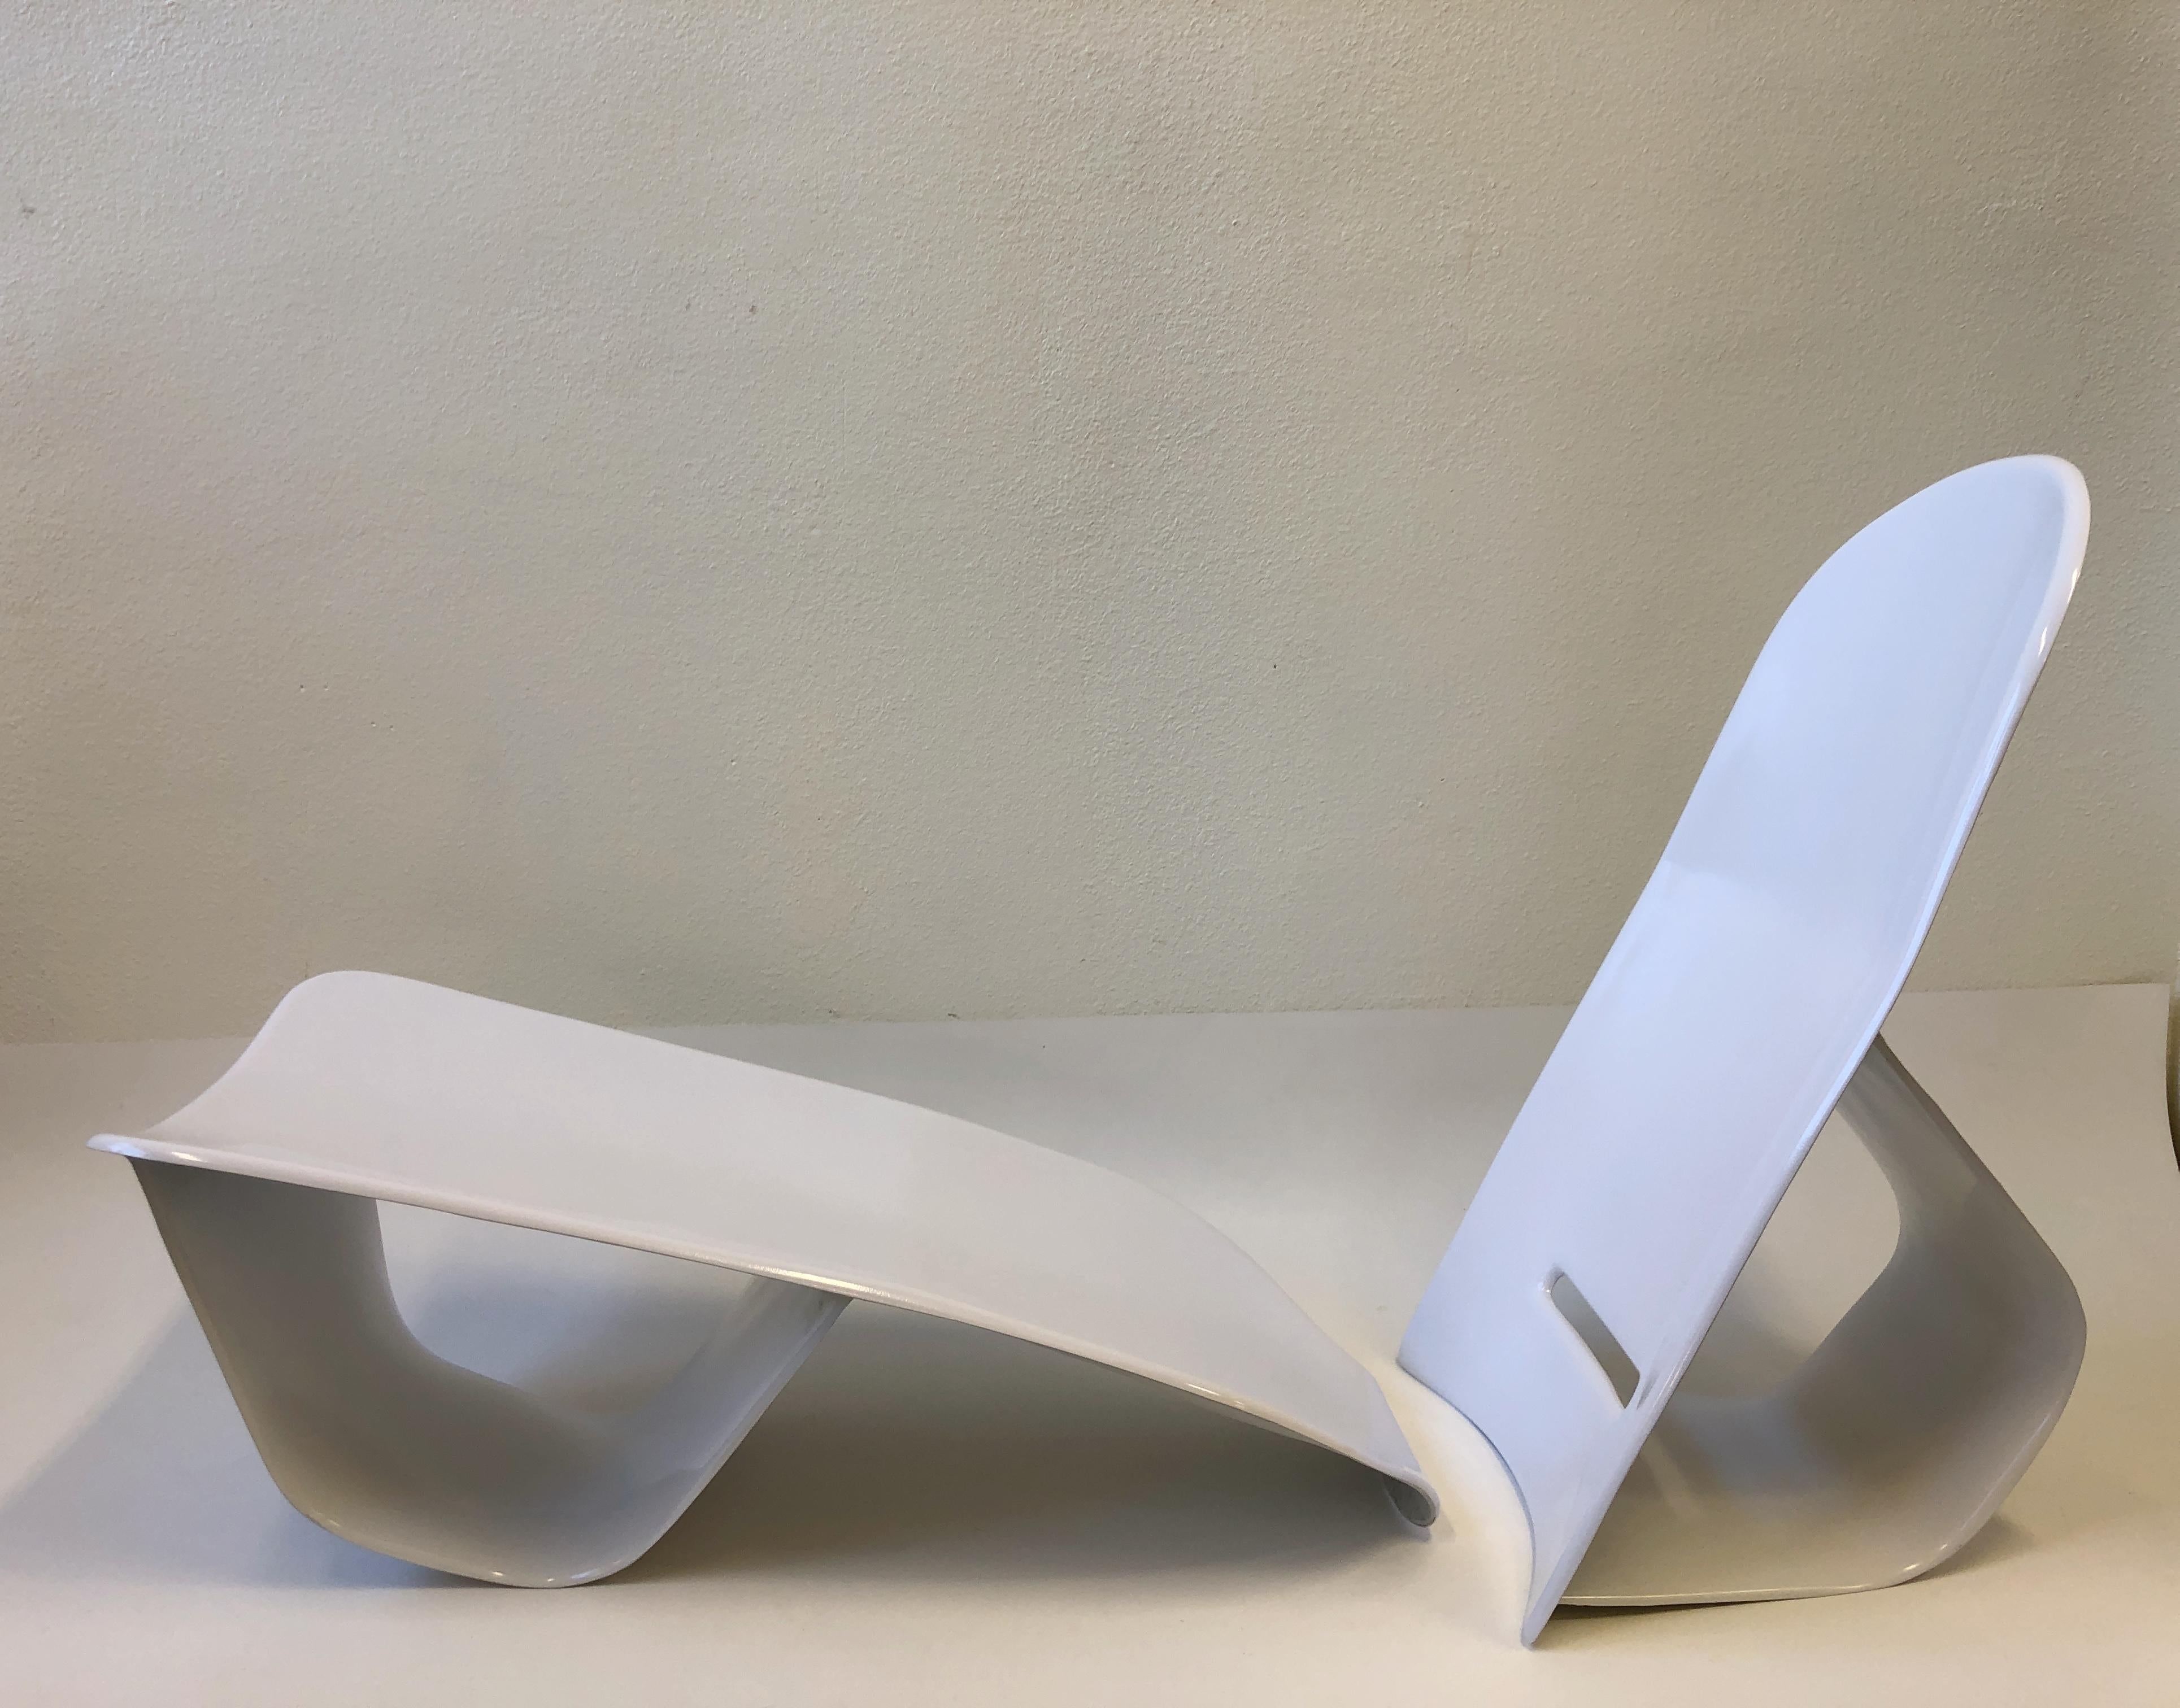 A rare set of three white lacquer “Aca“ adjustable lounge chaises design by Po Shun Leong in the 1970s. The design won honorable mention in the 1972 Knoll International Furniture competition. The chases have been newly lacquered in original white